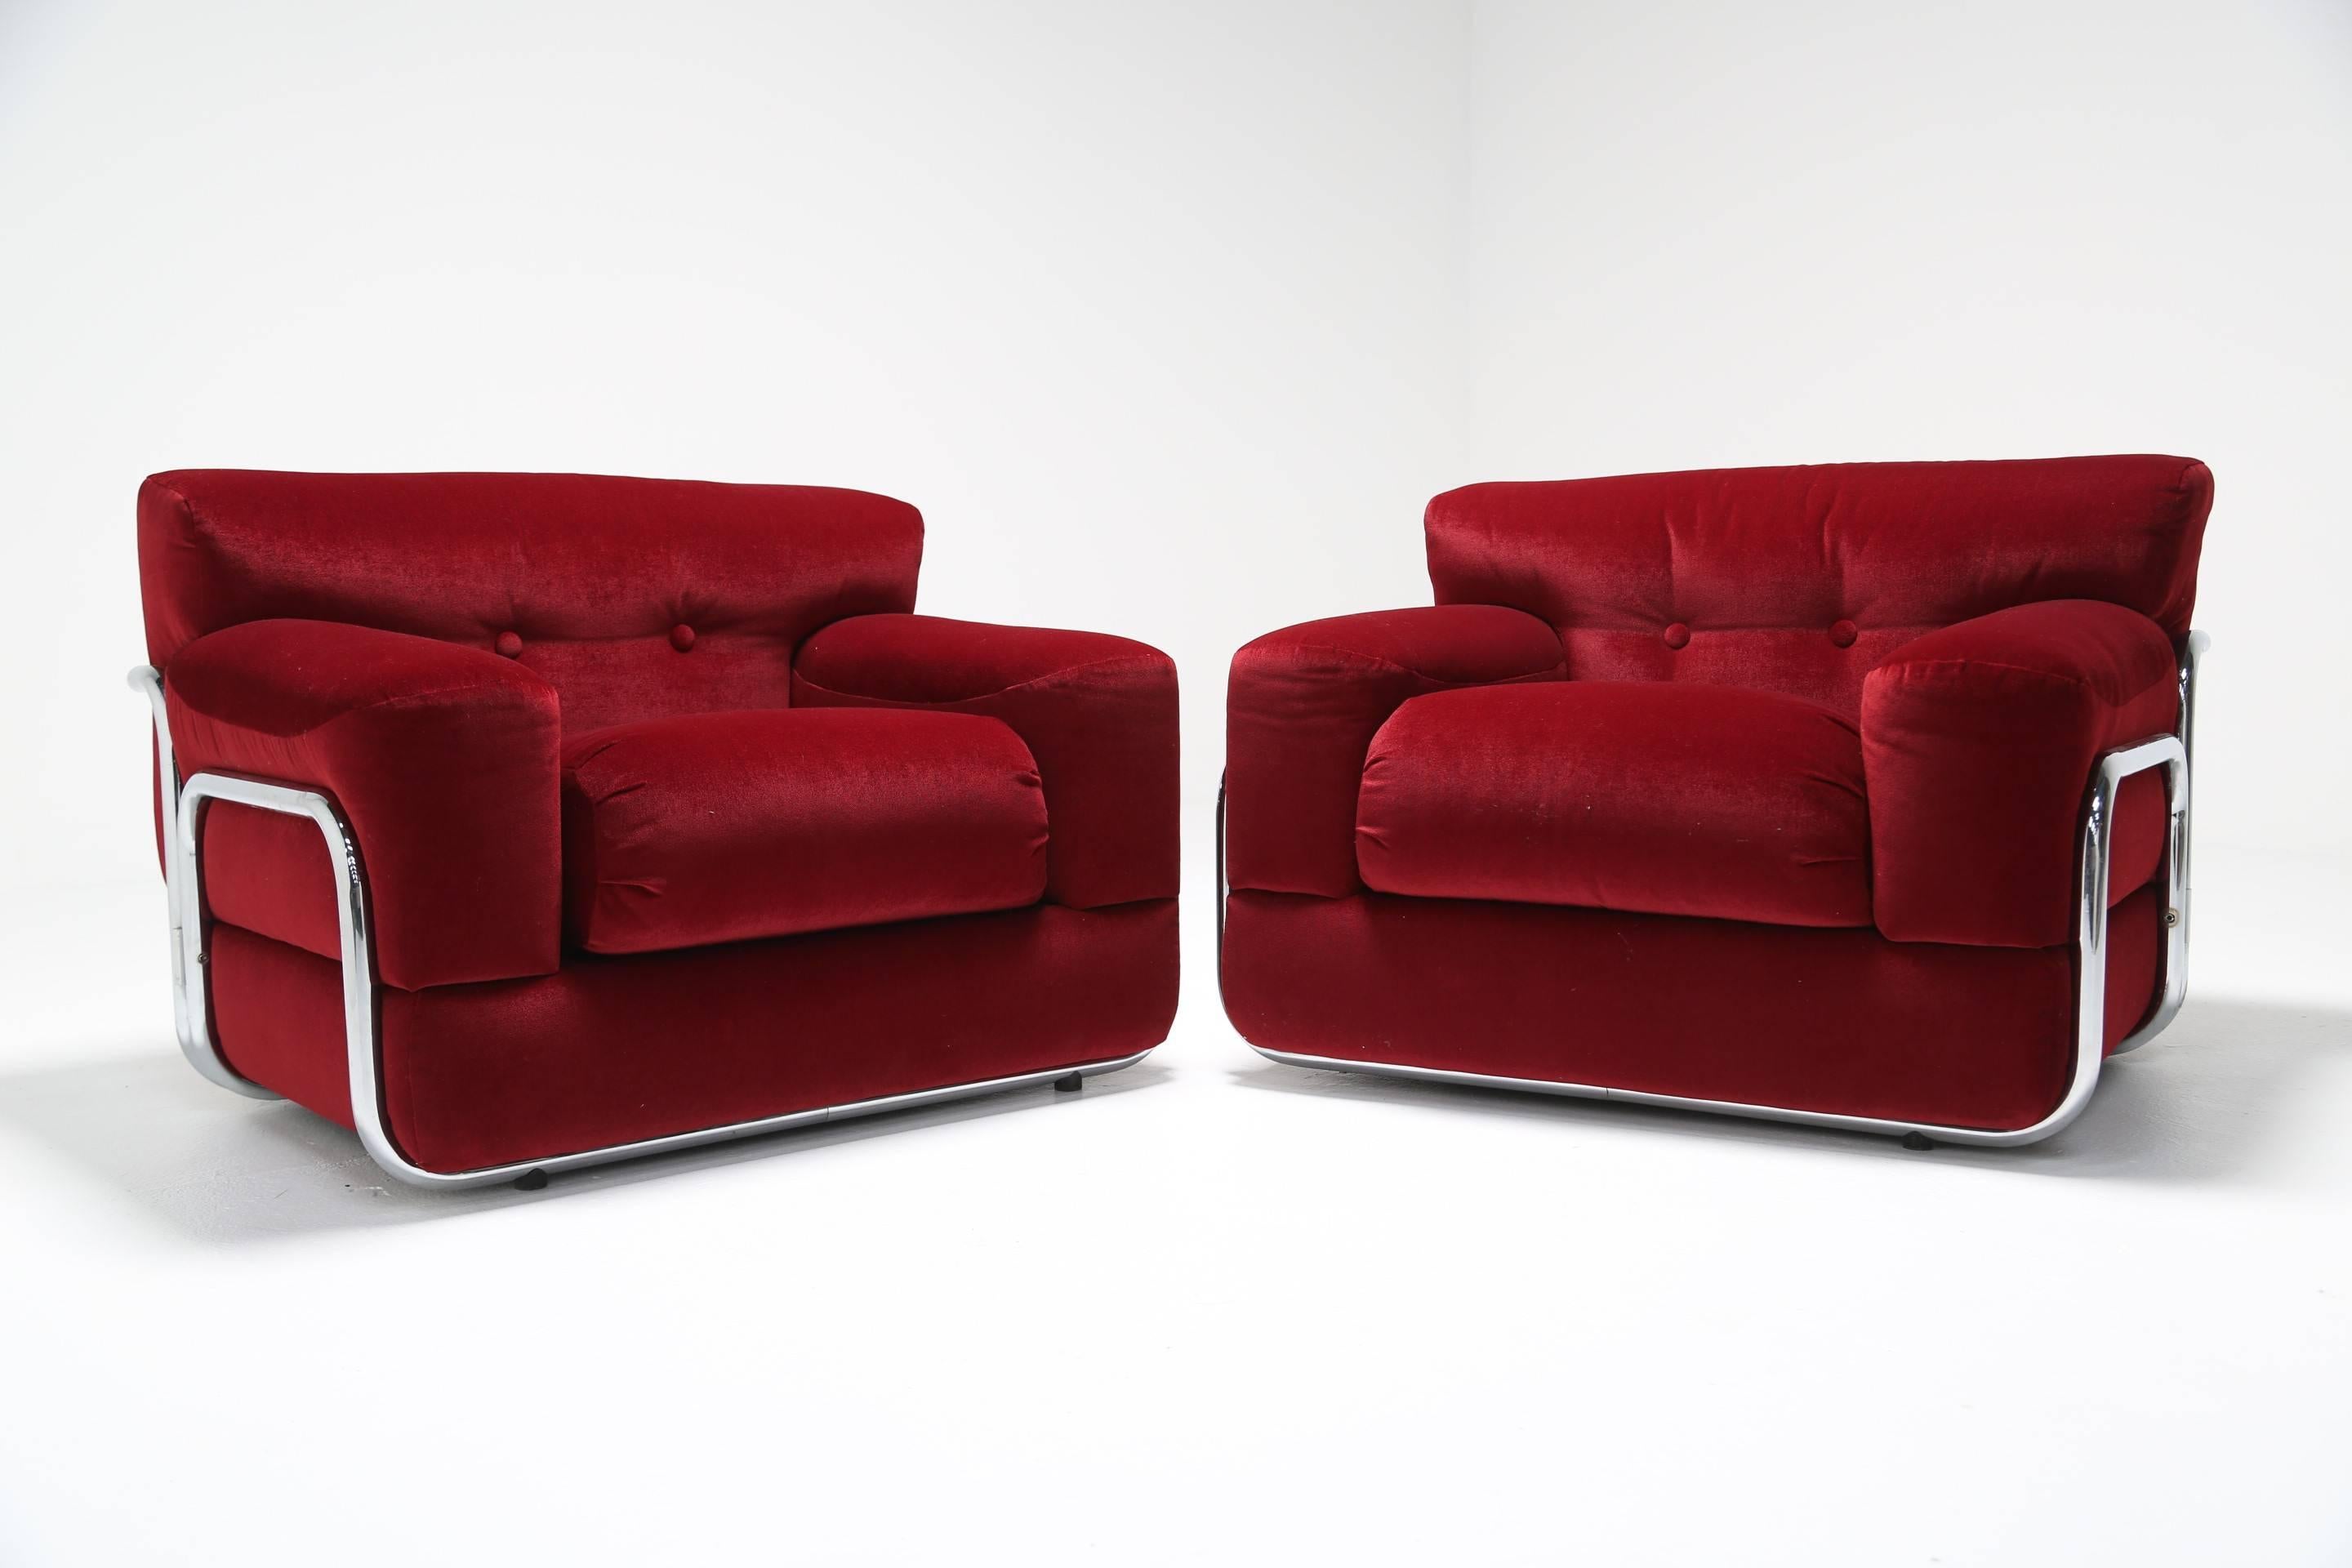 A handsome pair of large lounge chairs with a chrome tubular frame upholstered in a beautiful rich deep red velvet. They are incredibly comfortable and the chrome frame and deep cushions offers an interesting twist on the traditional armchair. Very